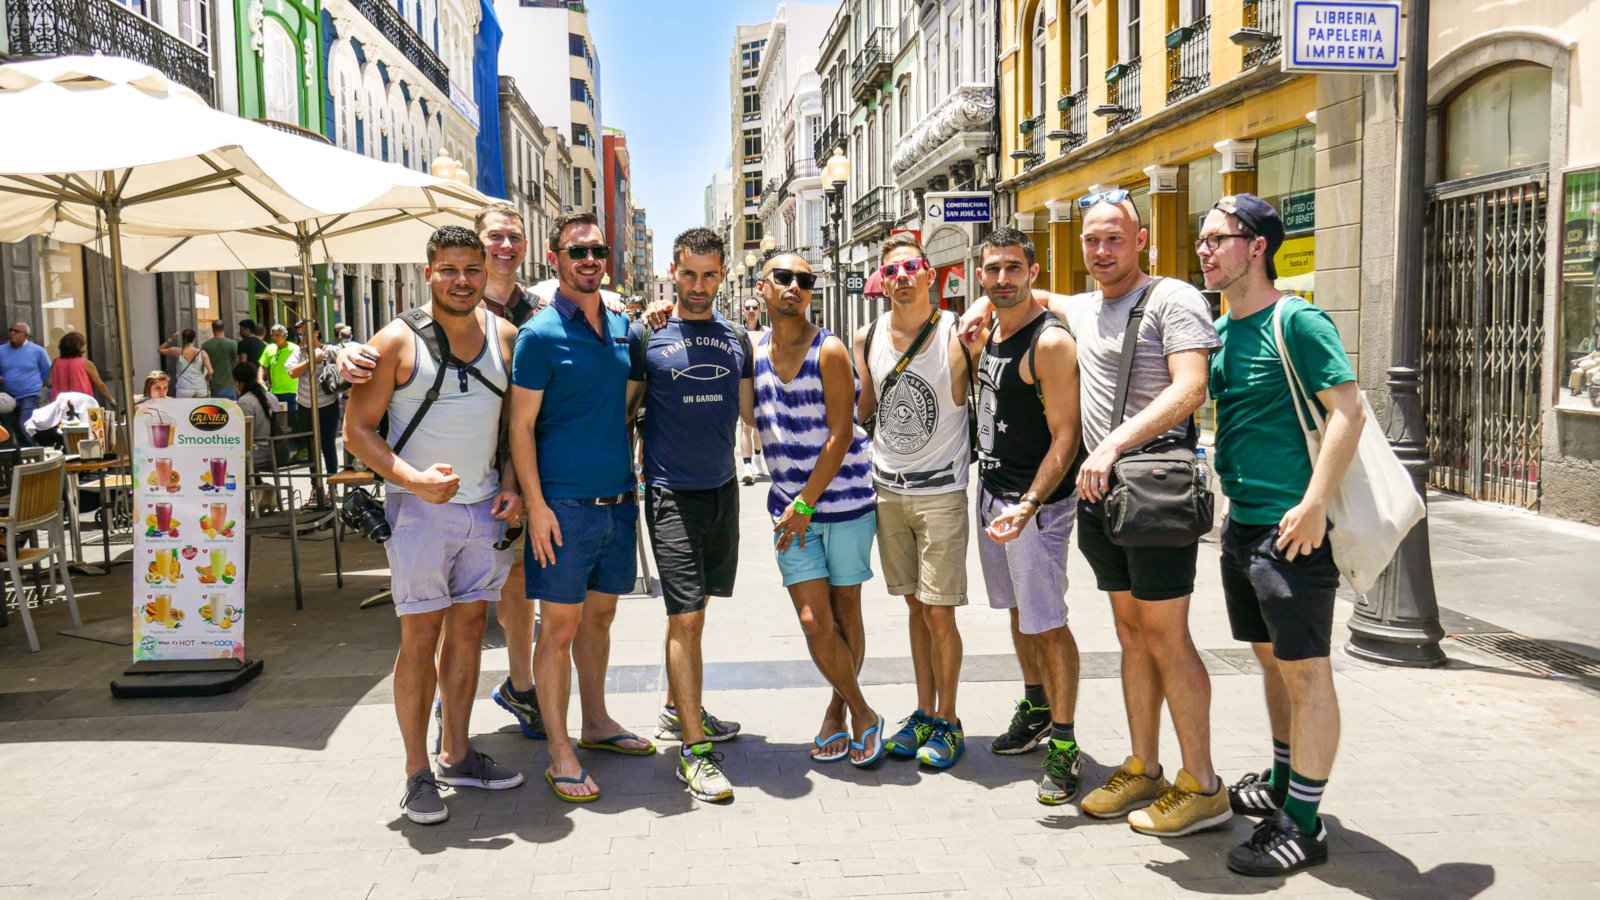 Gran Canaria is a delightful gay destination for a holiday in the sun